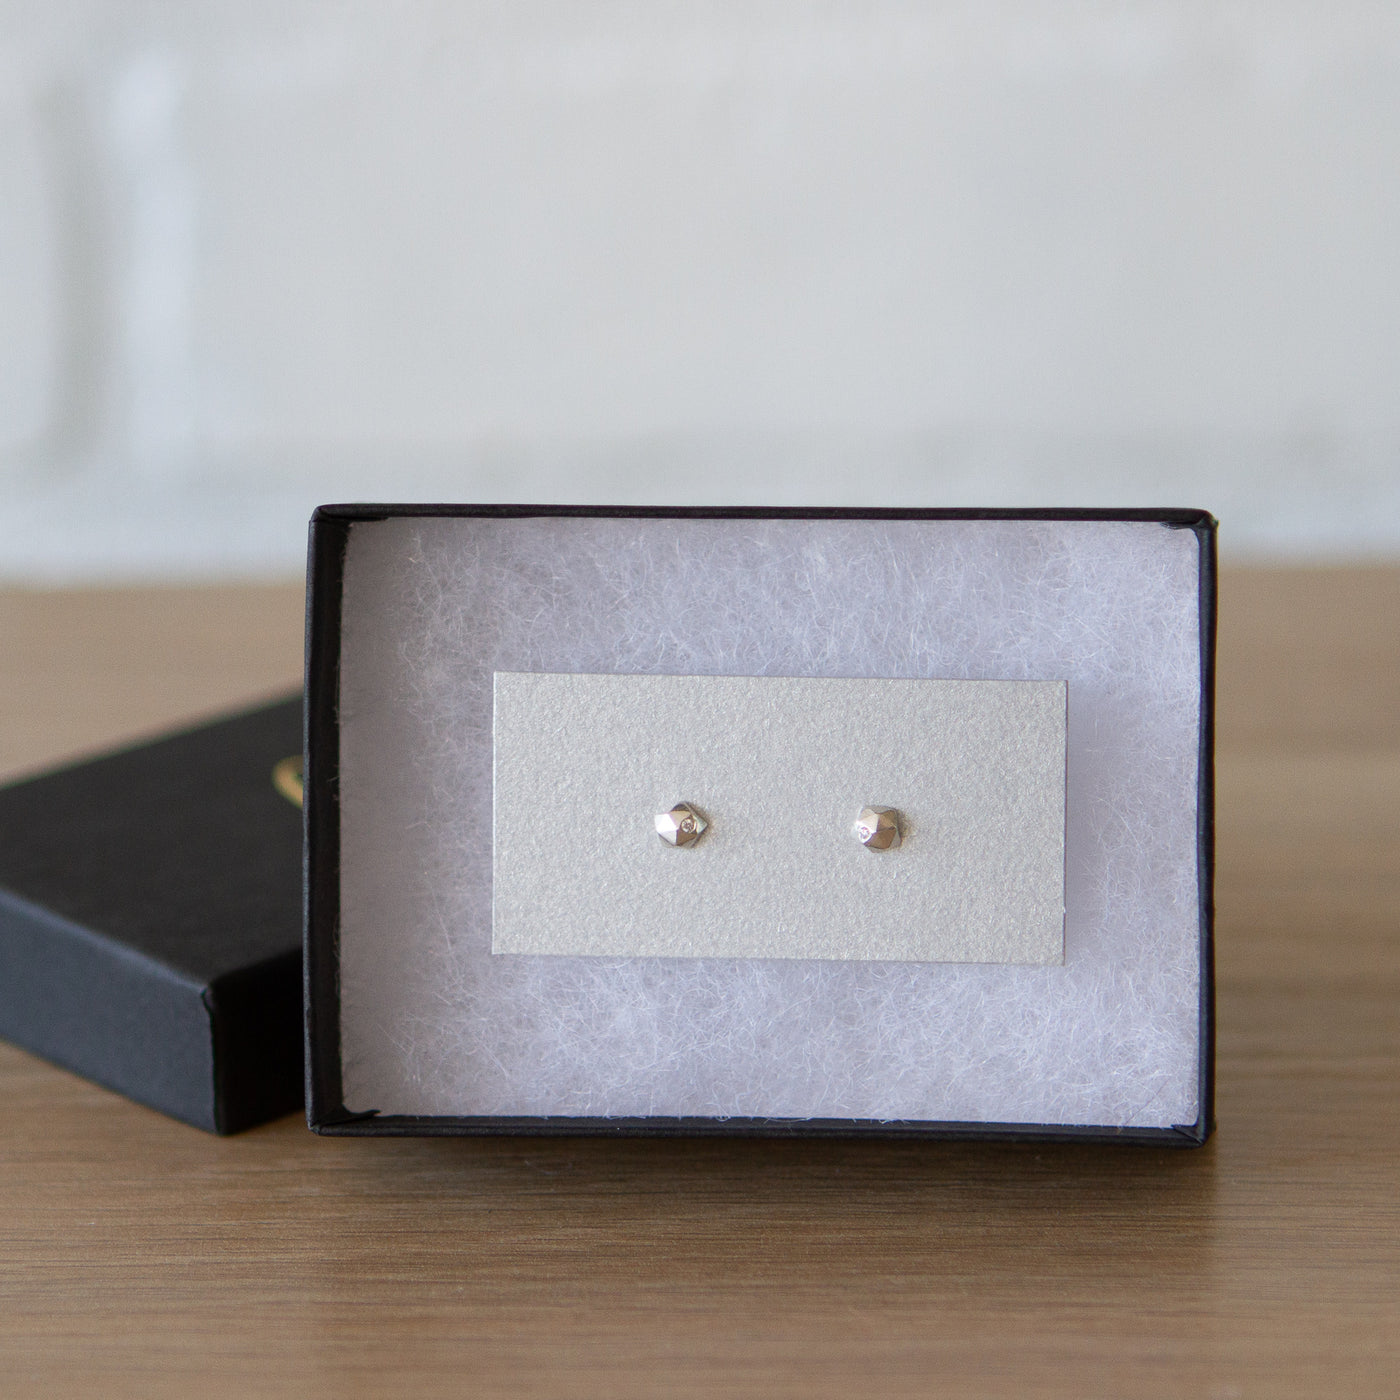 sterling silver micro size geometric faceted stud earrings with a single flush set diamond by Corey Egan in a gift box